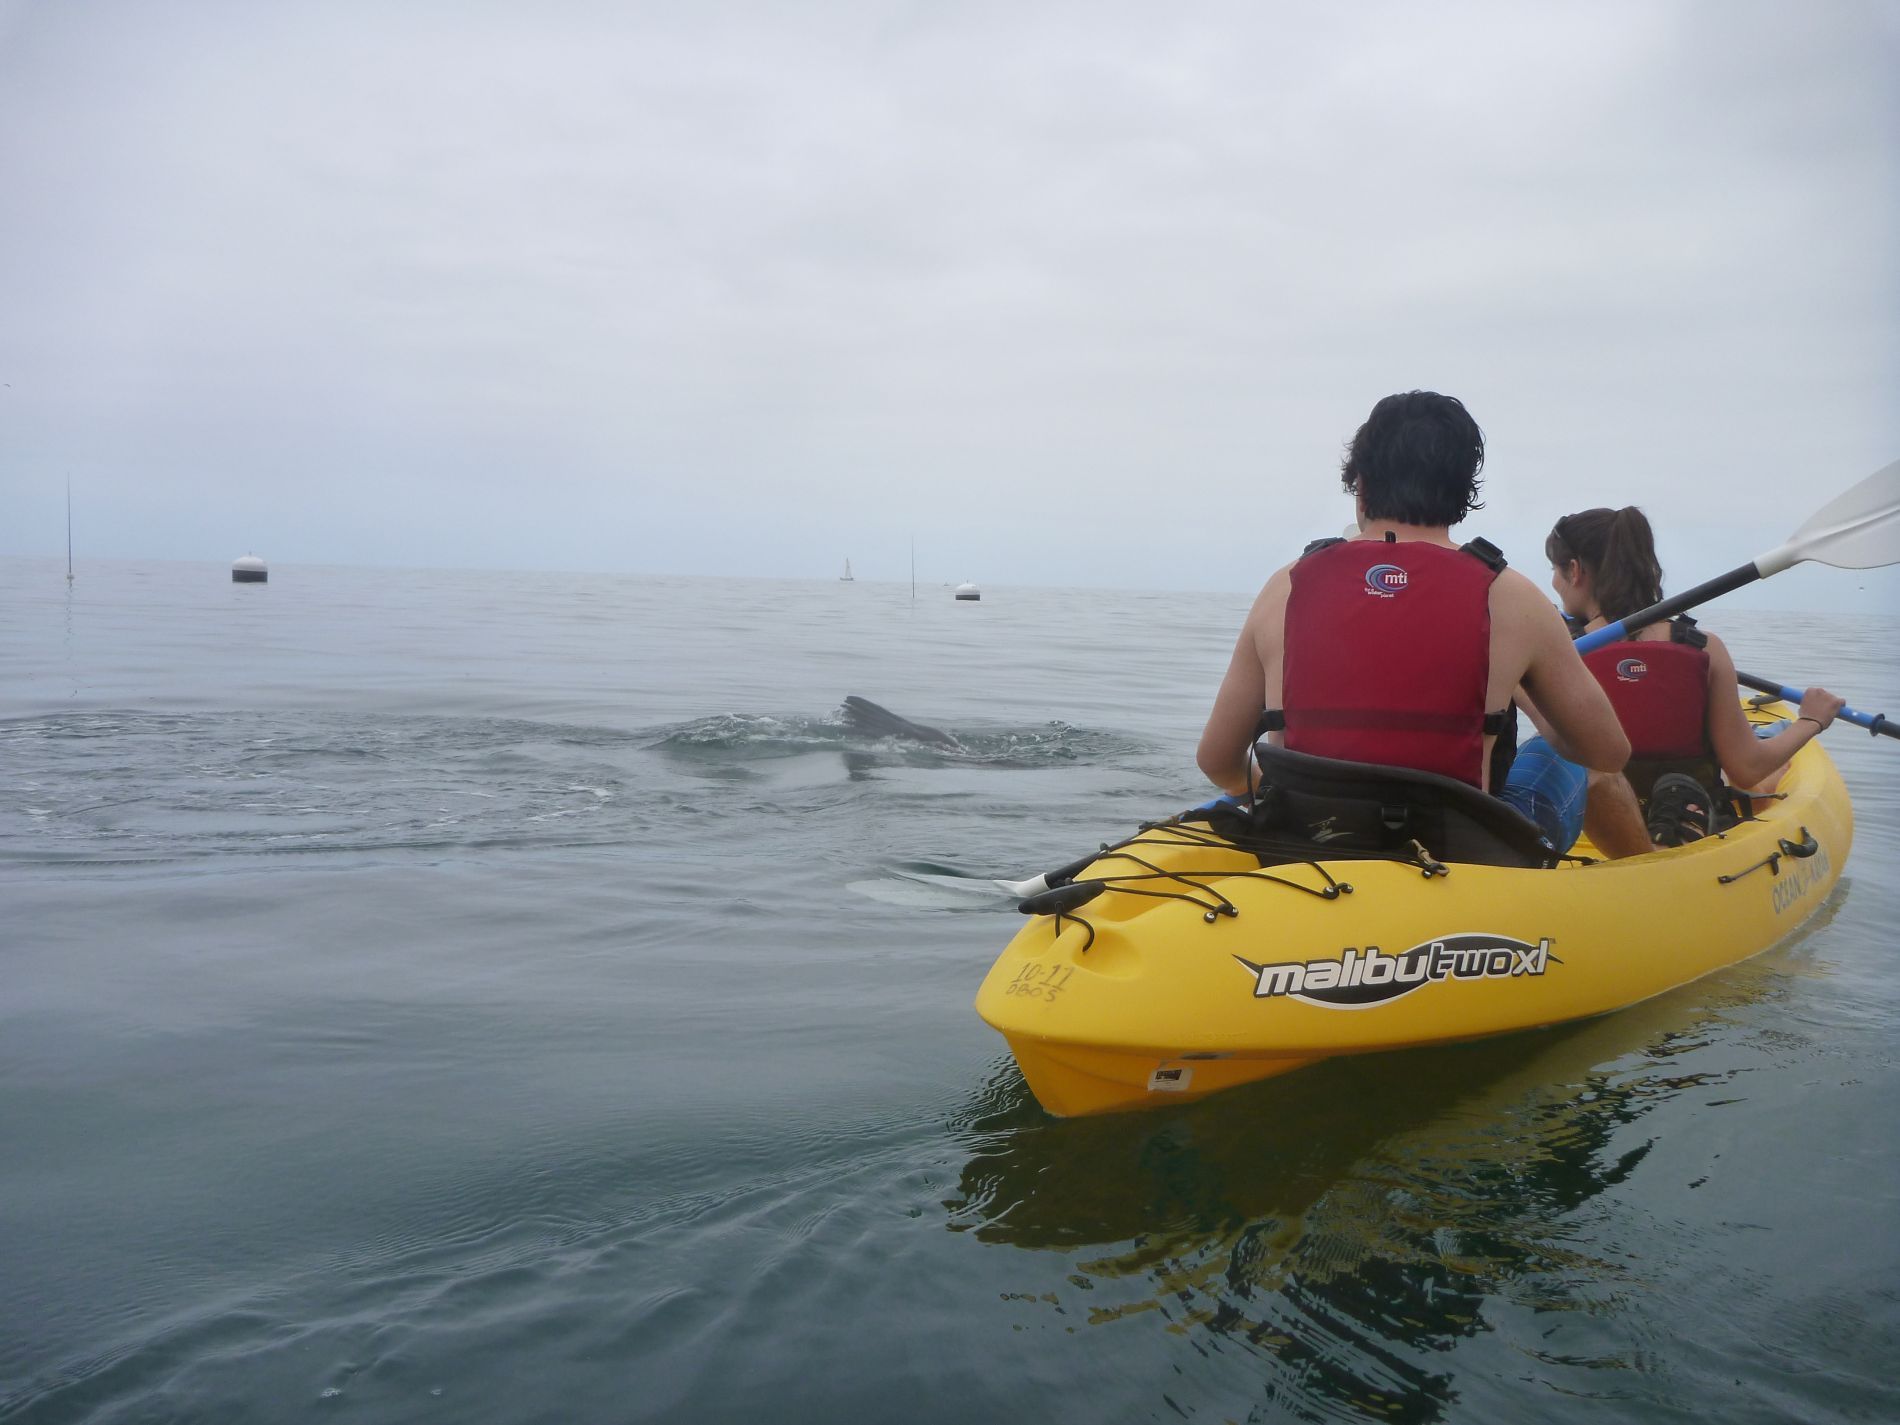 A seal jumps above the surface of the water next to a sea kayak near Catalina Island.